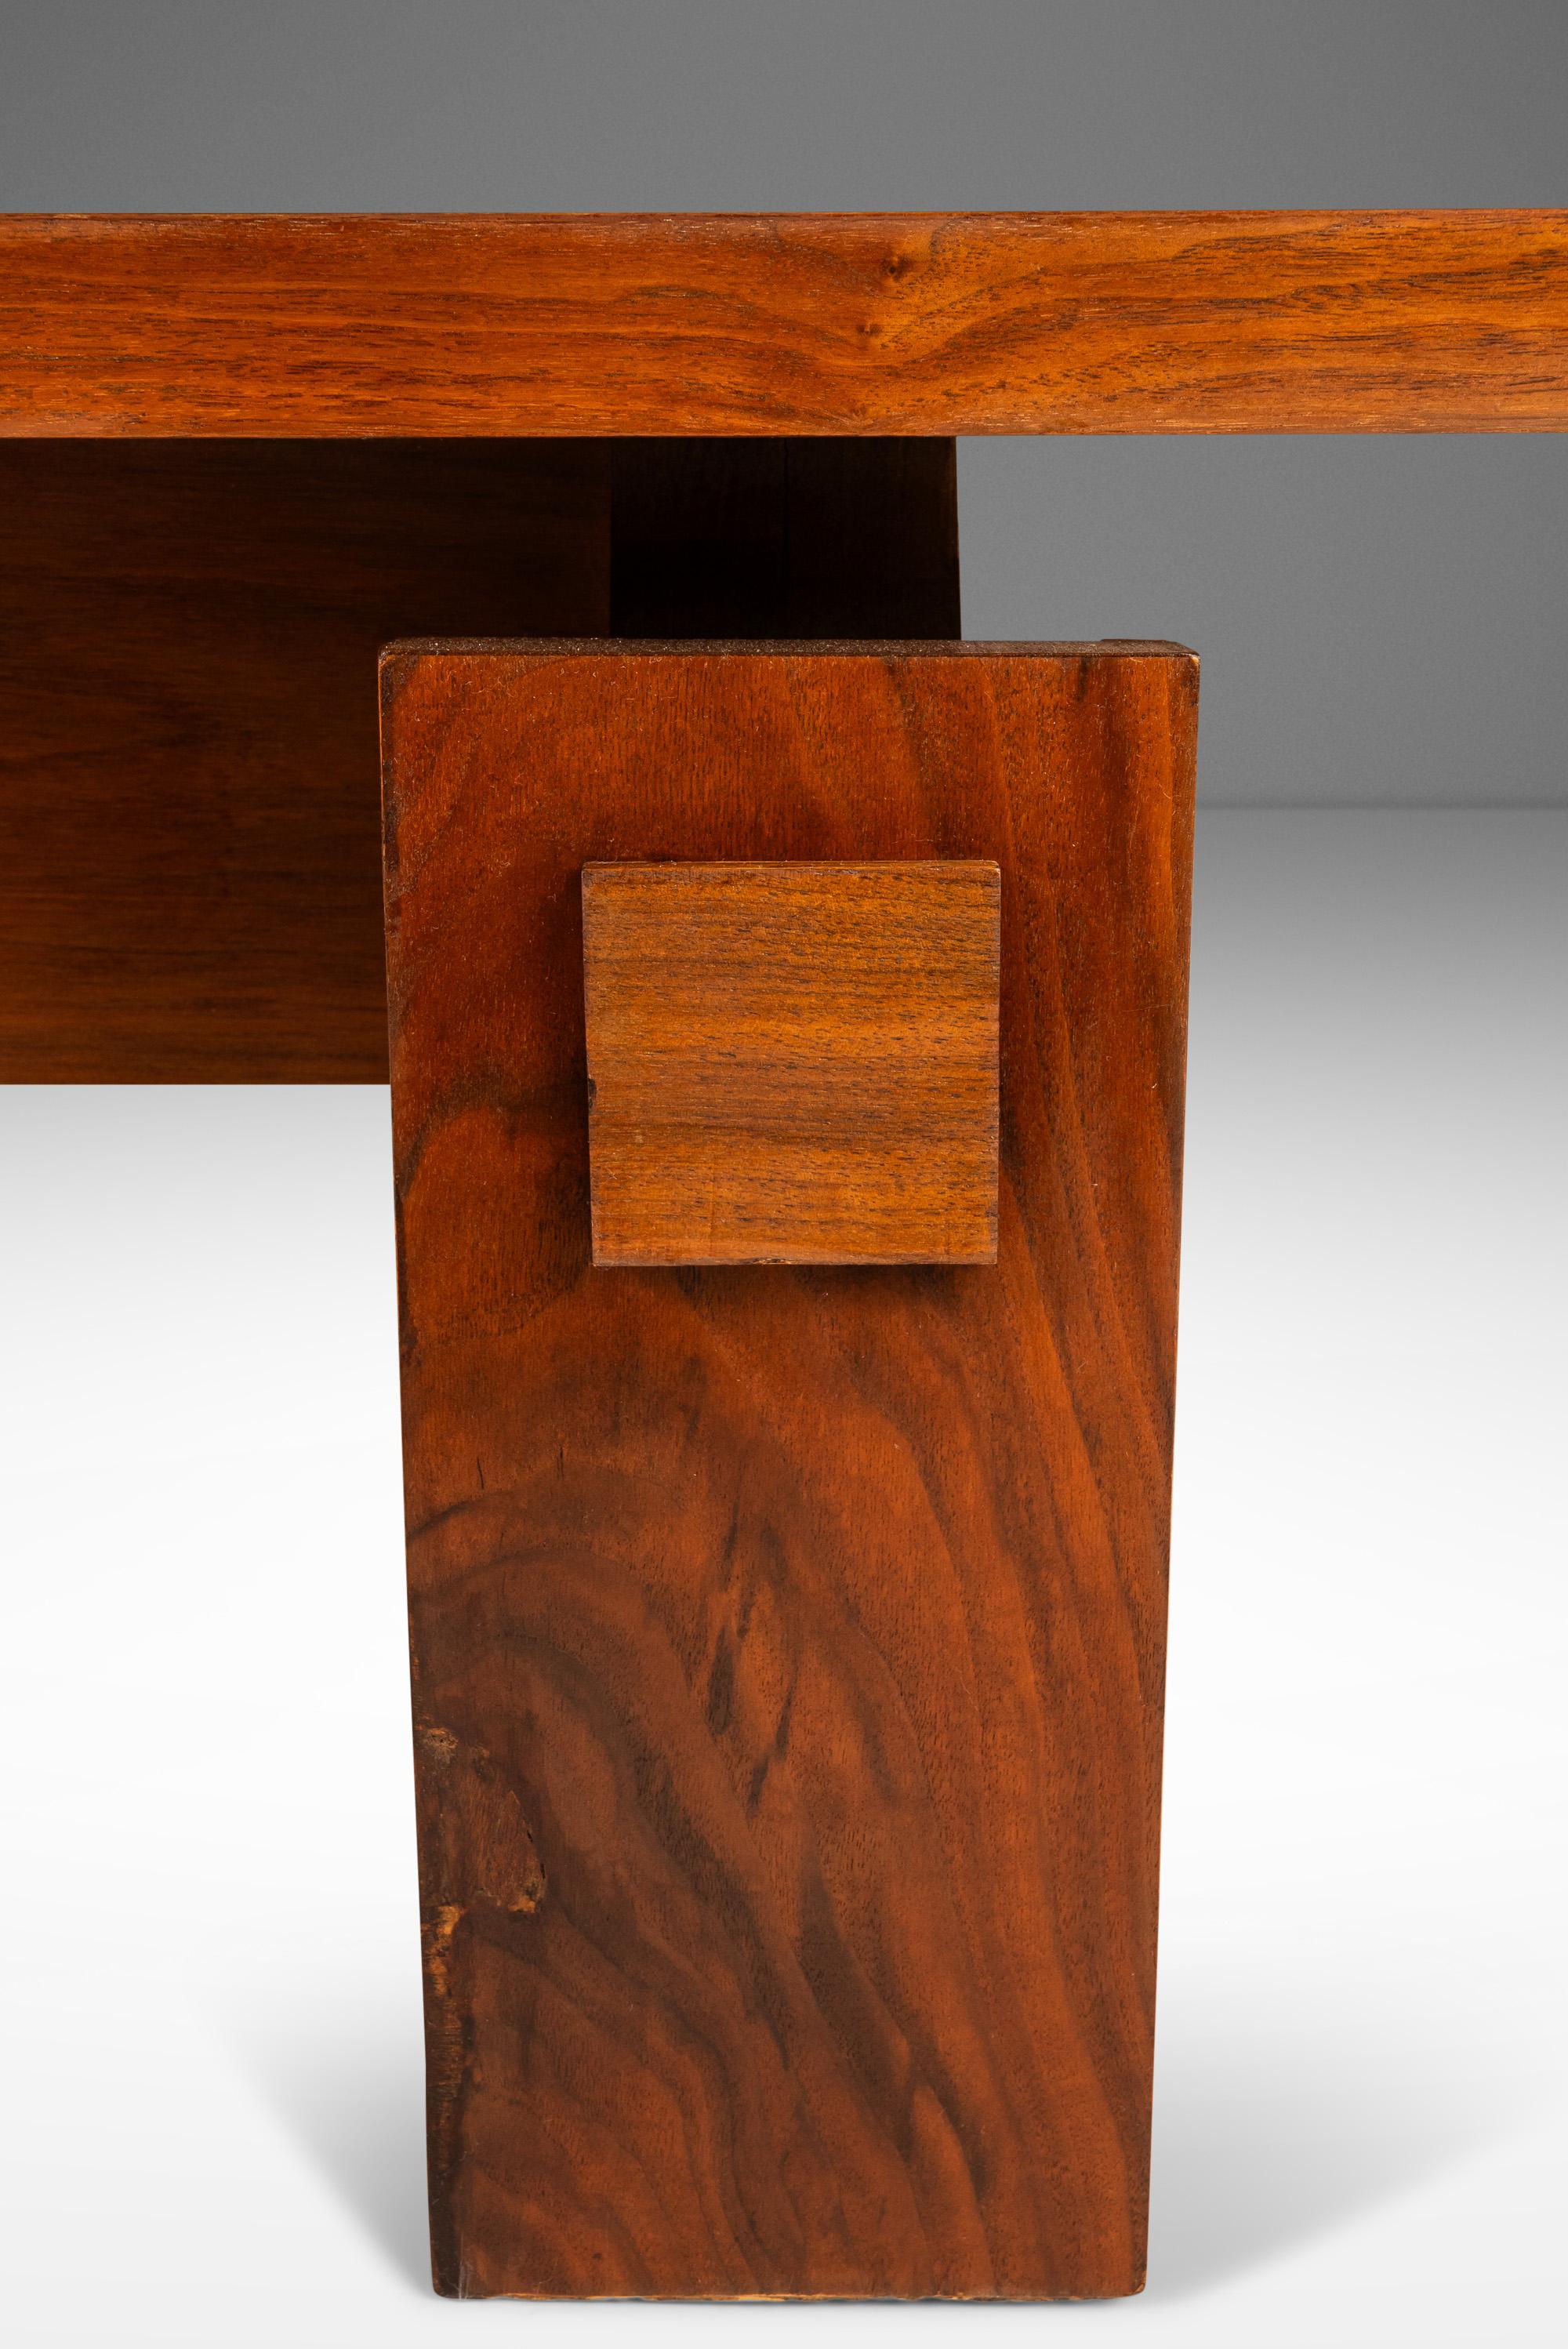 Modern Brutalist Coffee Table in Walnut with Burlwood Inlay by Lane, c. 1970's 5